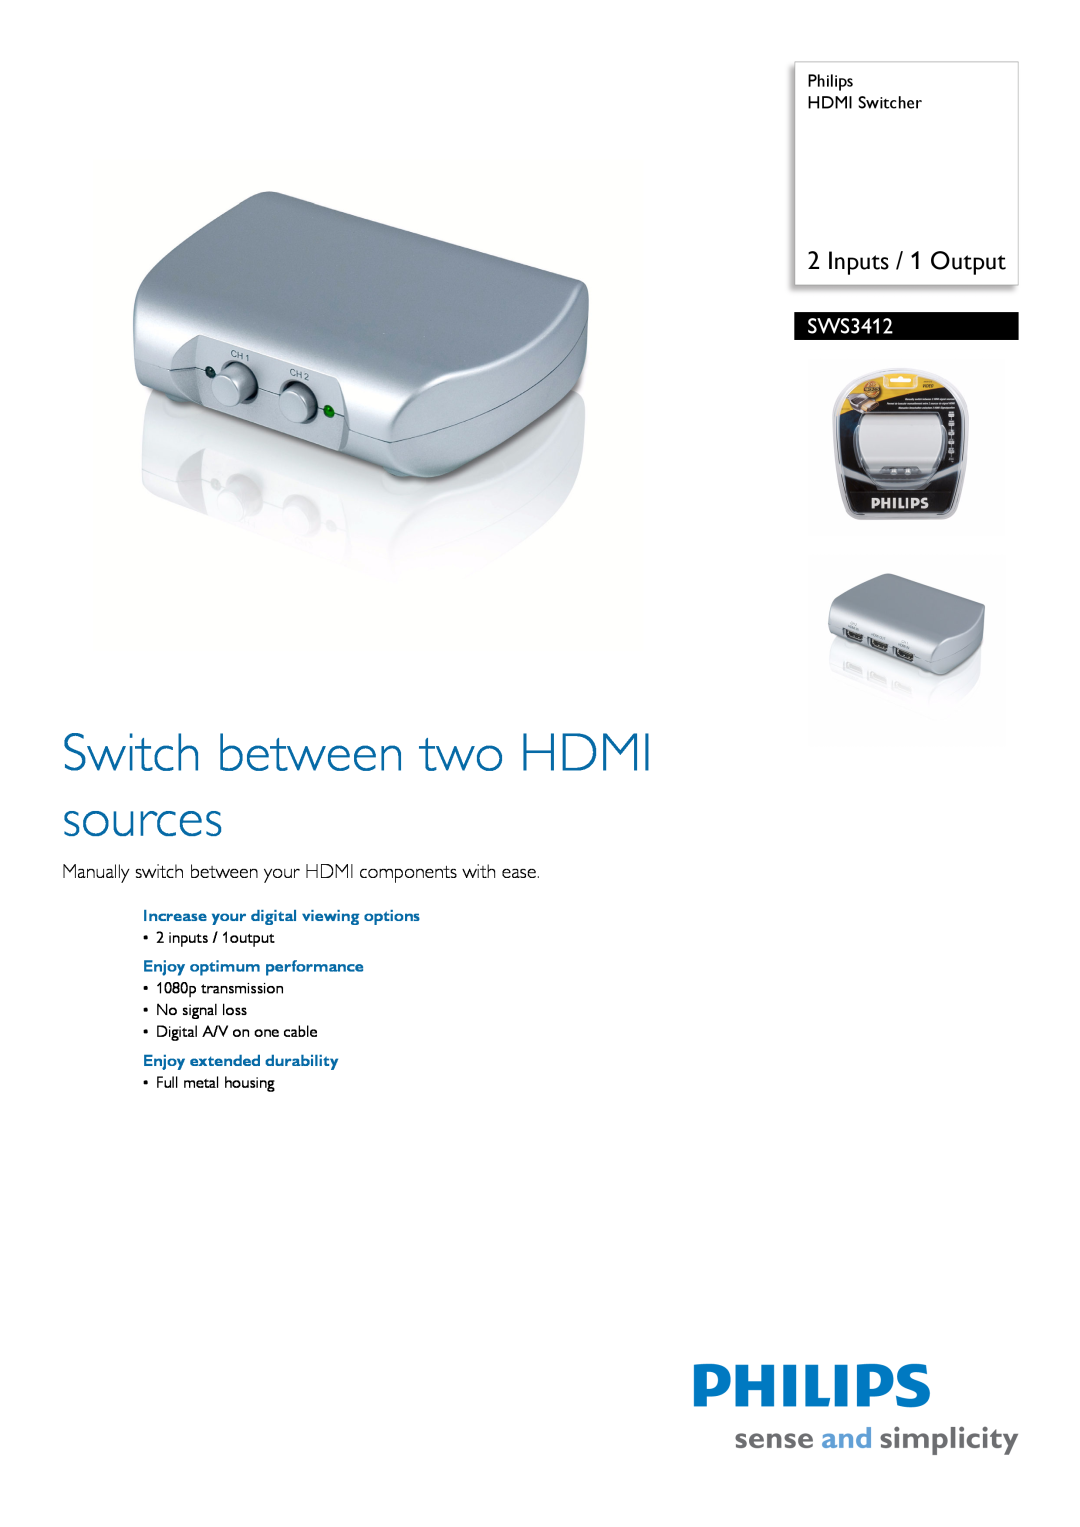 Philips SWS3412/10 manual Philips HDMI Switcher, Increase your digital viewing options, Enjoy optimum performance 